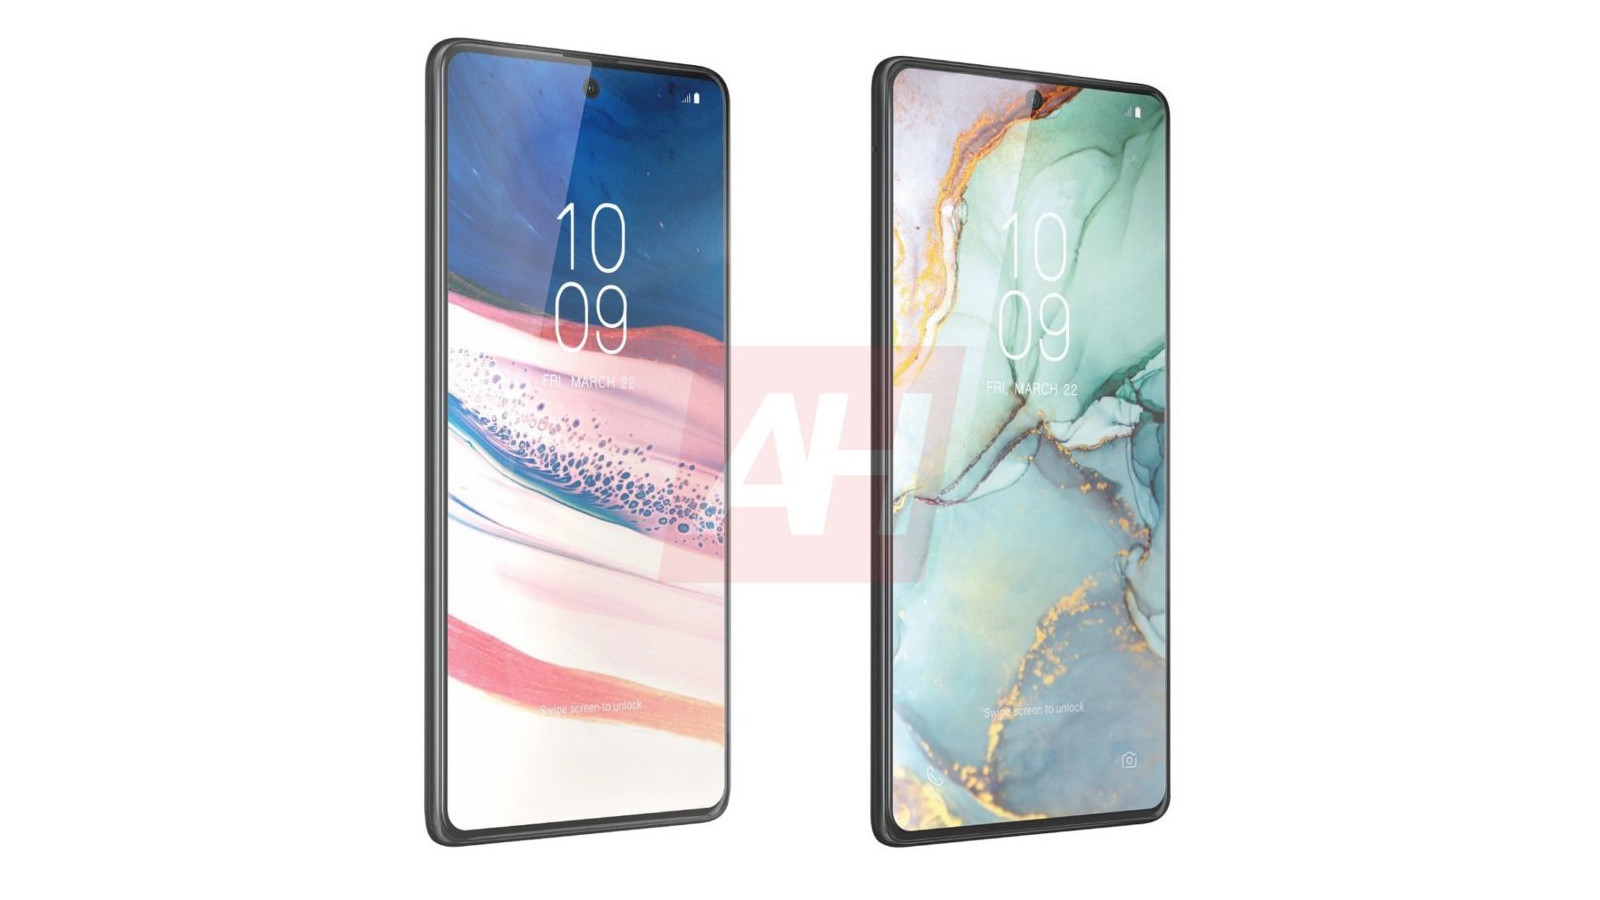 The Samsung Galaxy S10 Lite and Note 10 Lite according to Android Headlines.